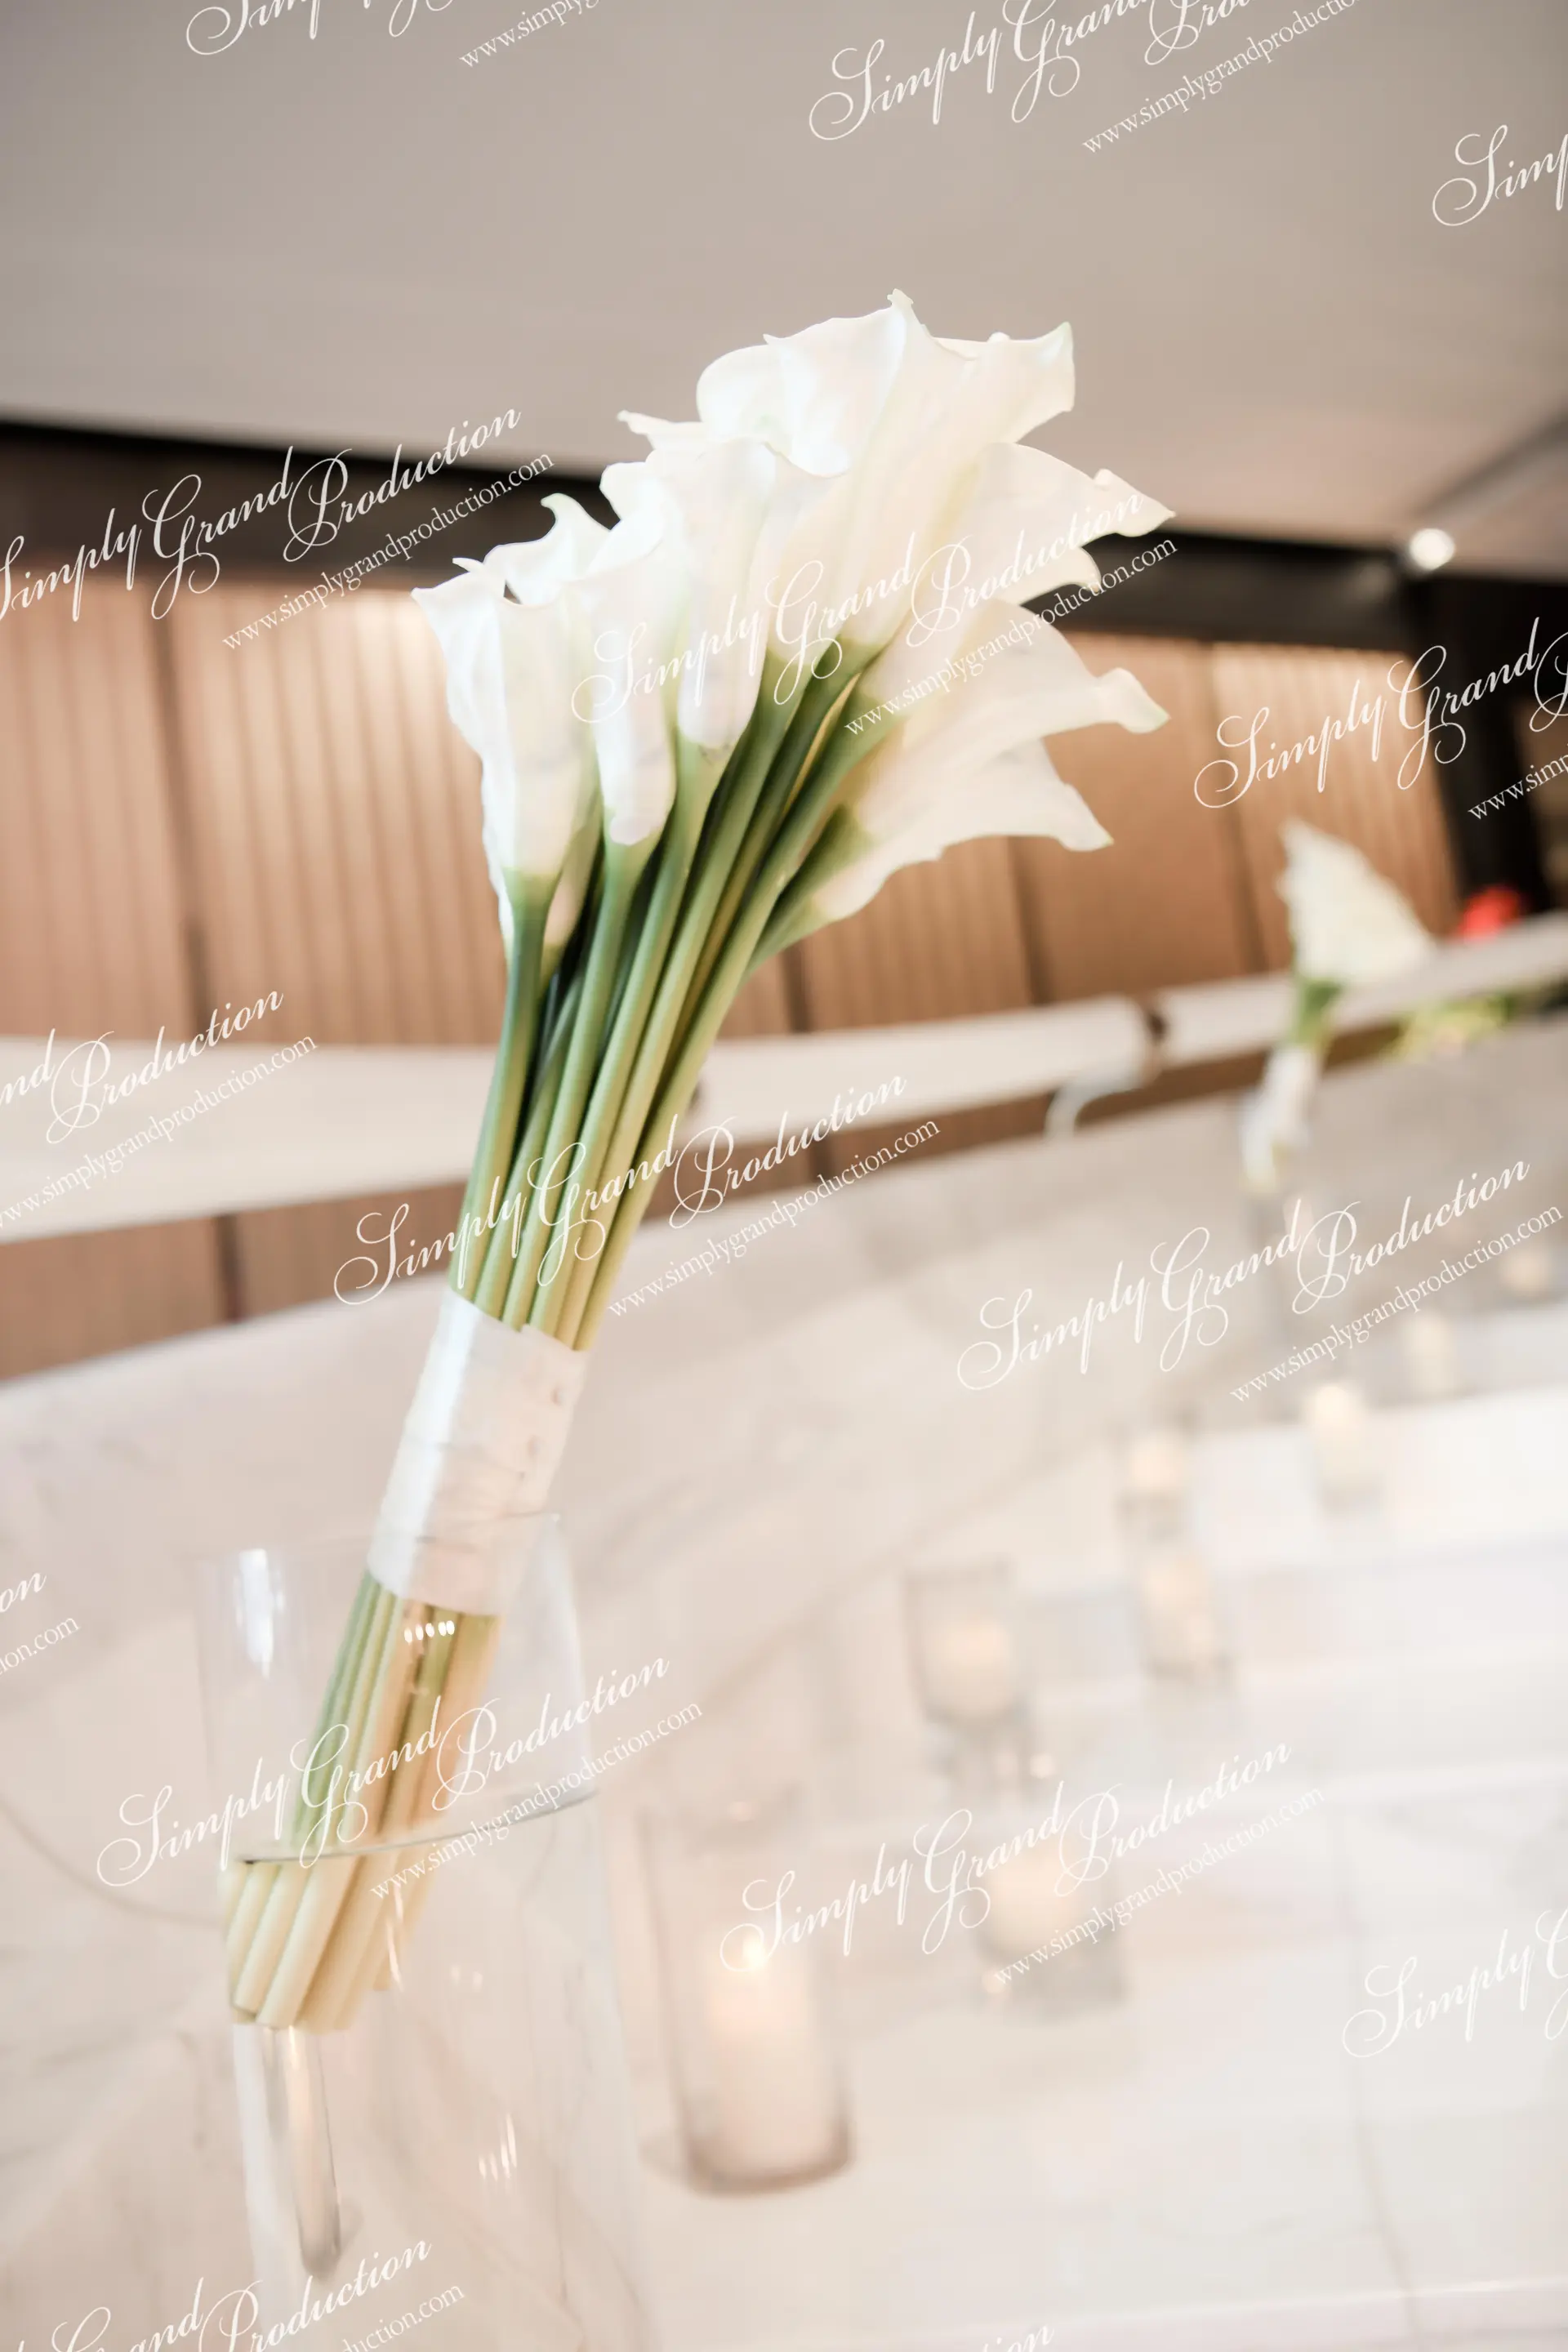 Simply_Grand_Production_Classic_Elegant_wedding_decoration_staircase_white_floral_InterContinental_1_12